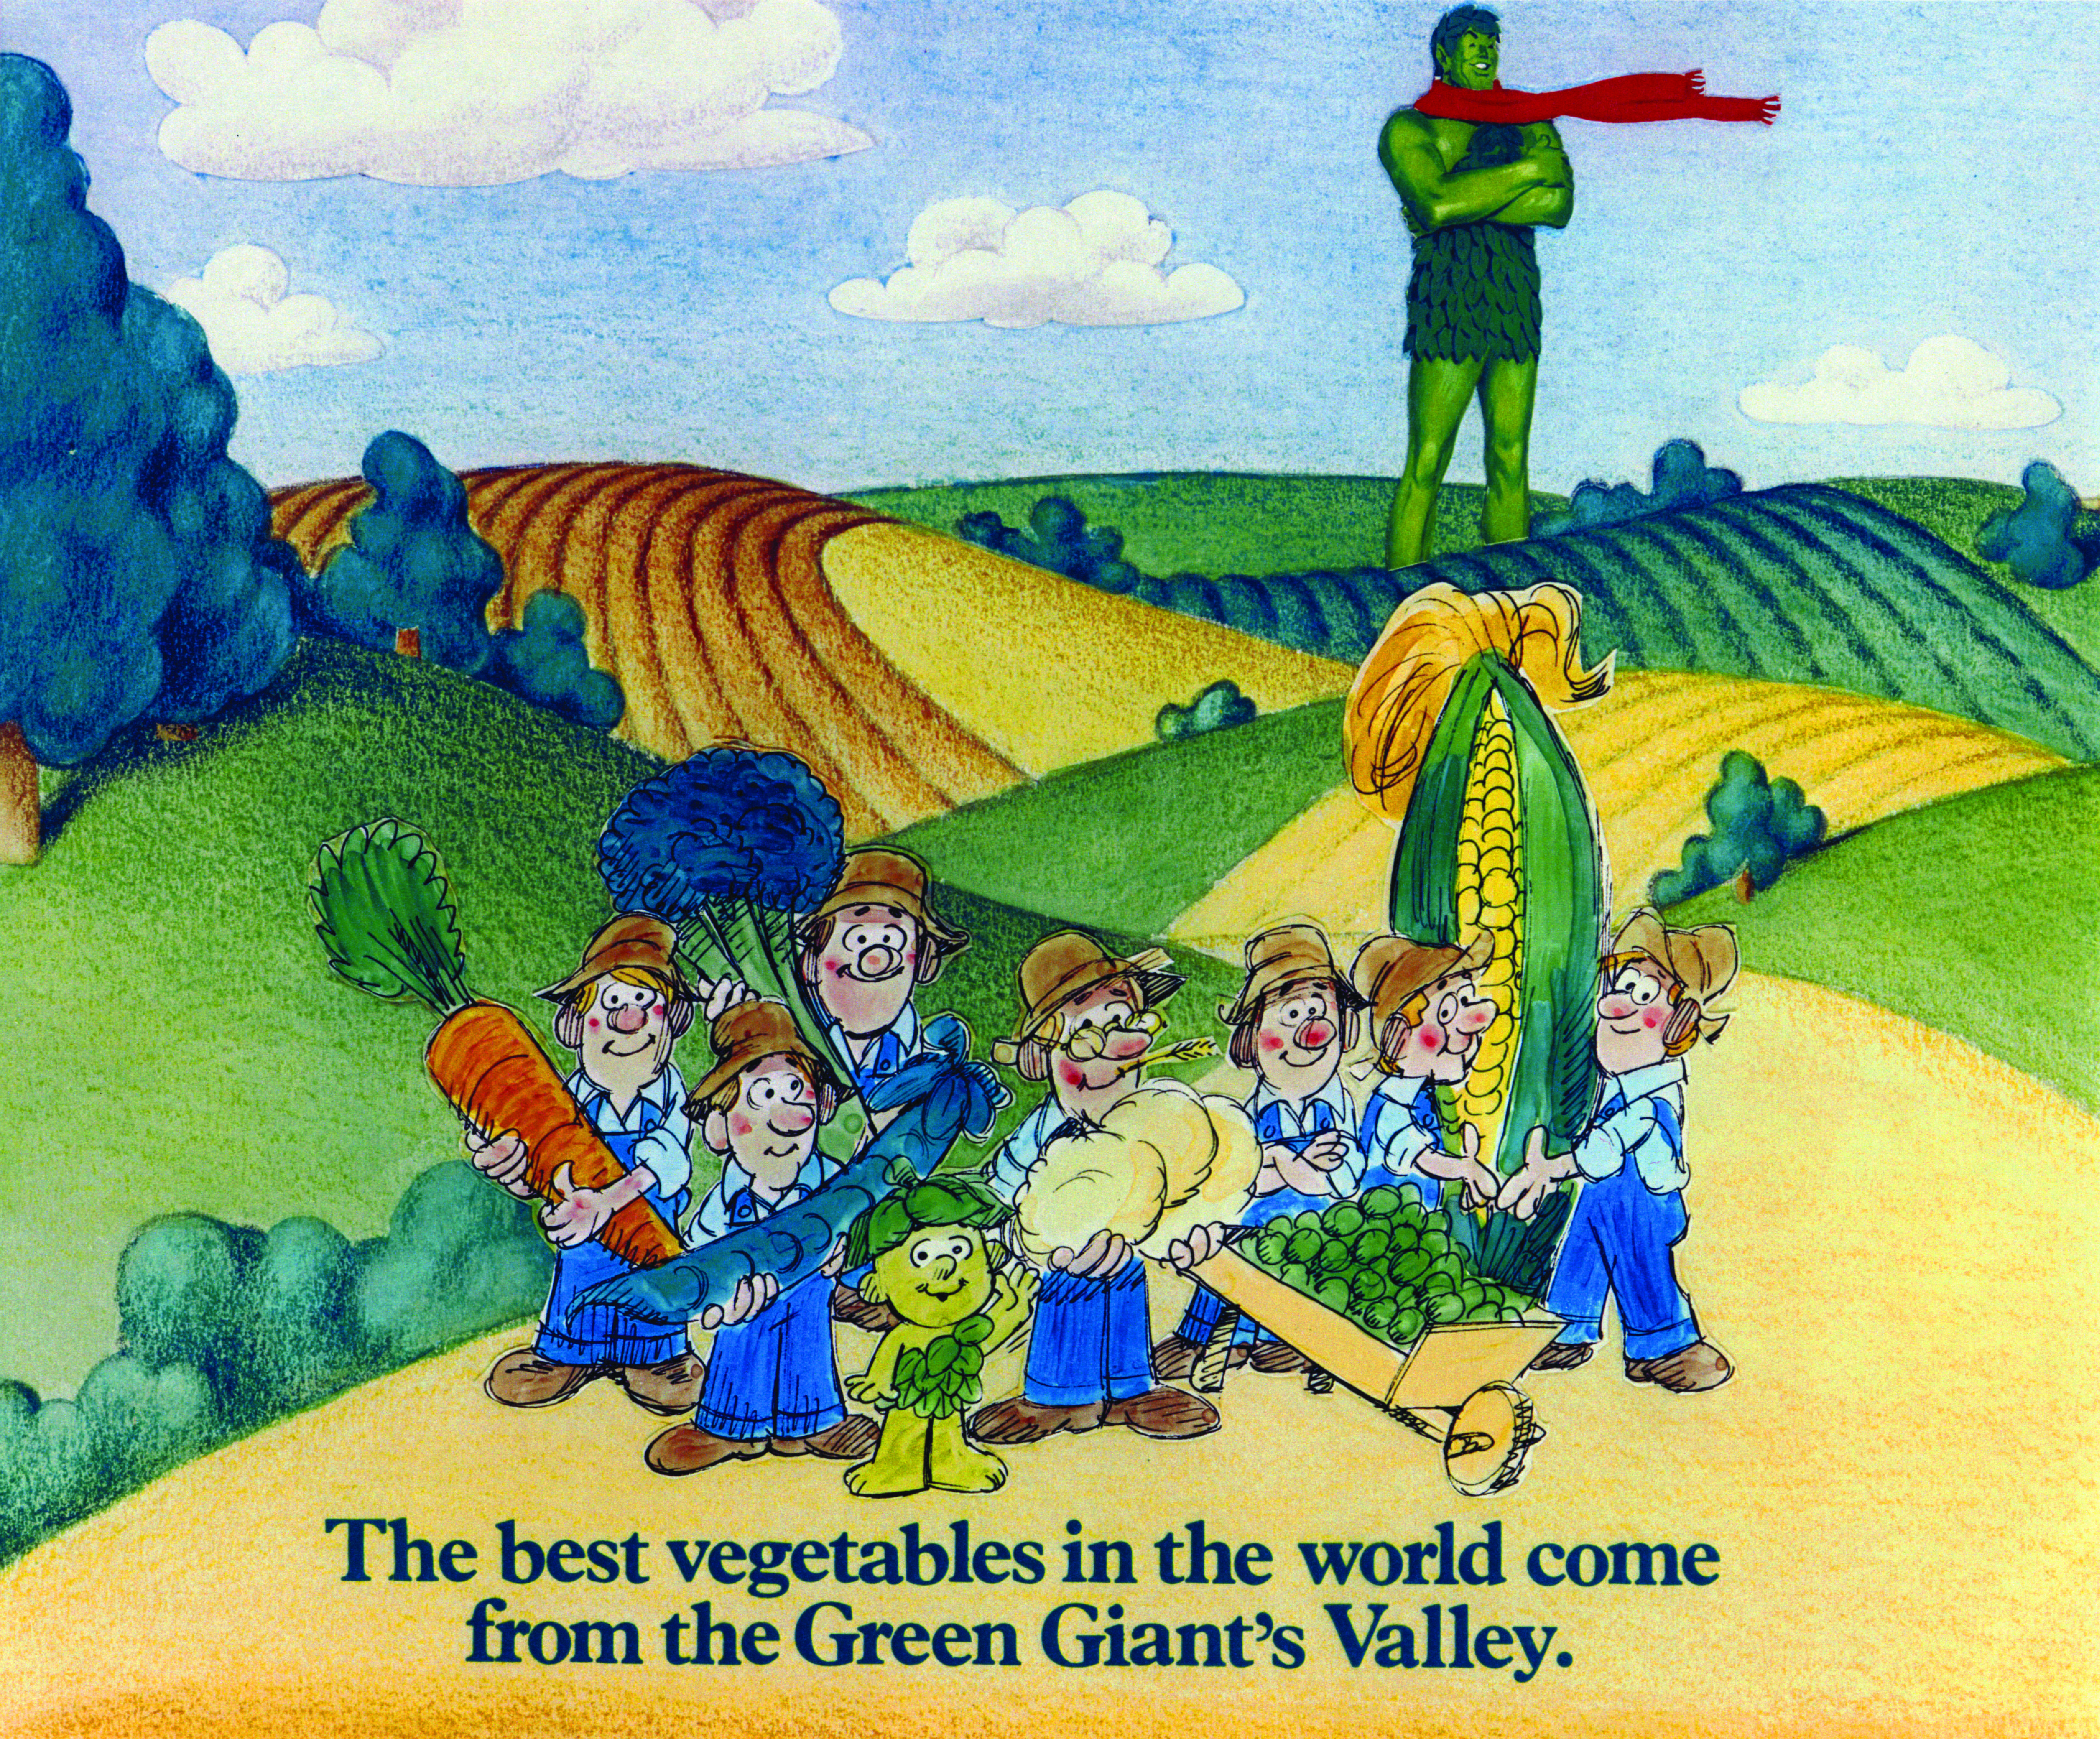 Green Giant vegetable ad from 1960